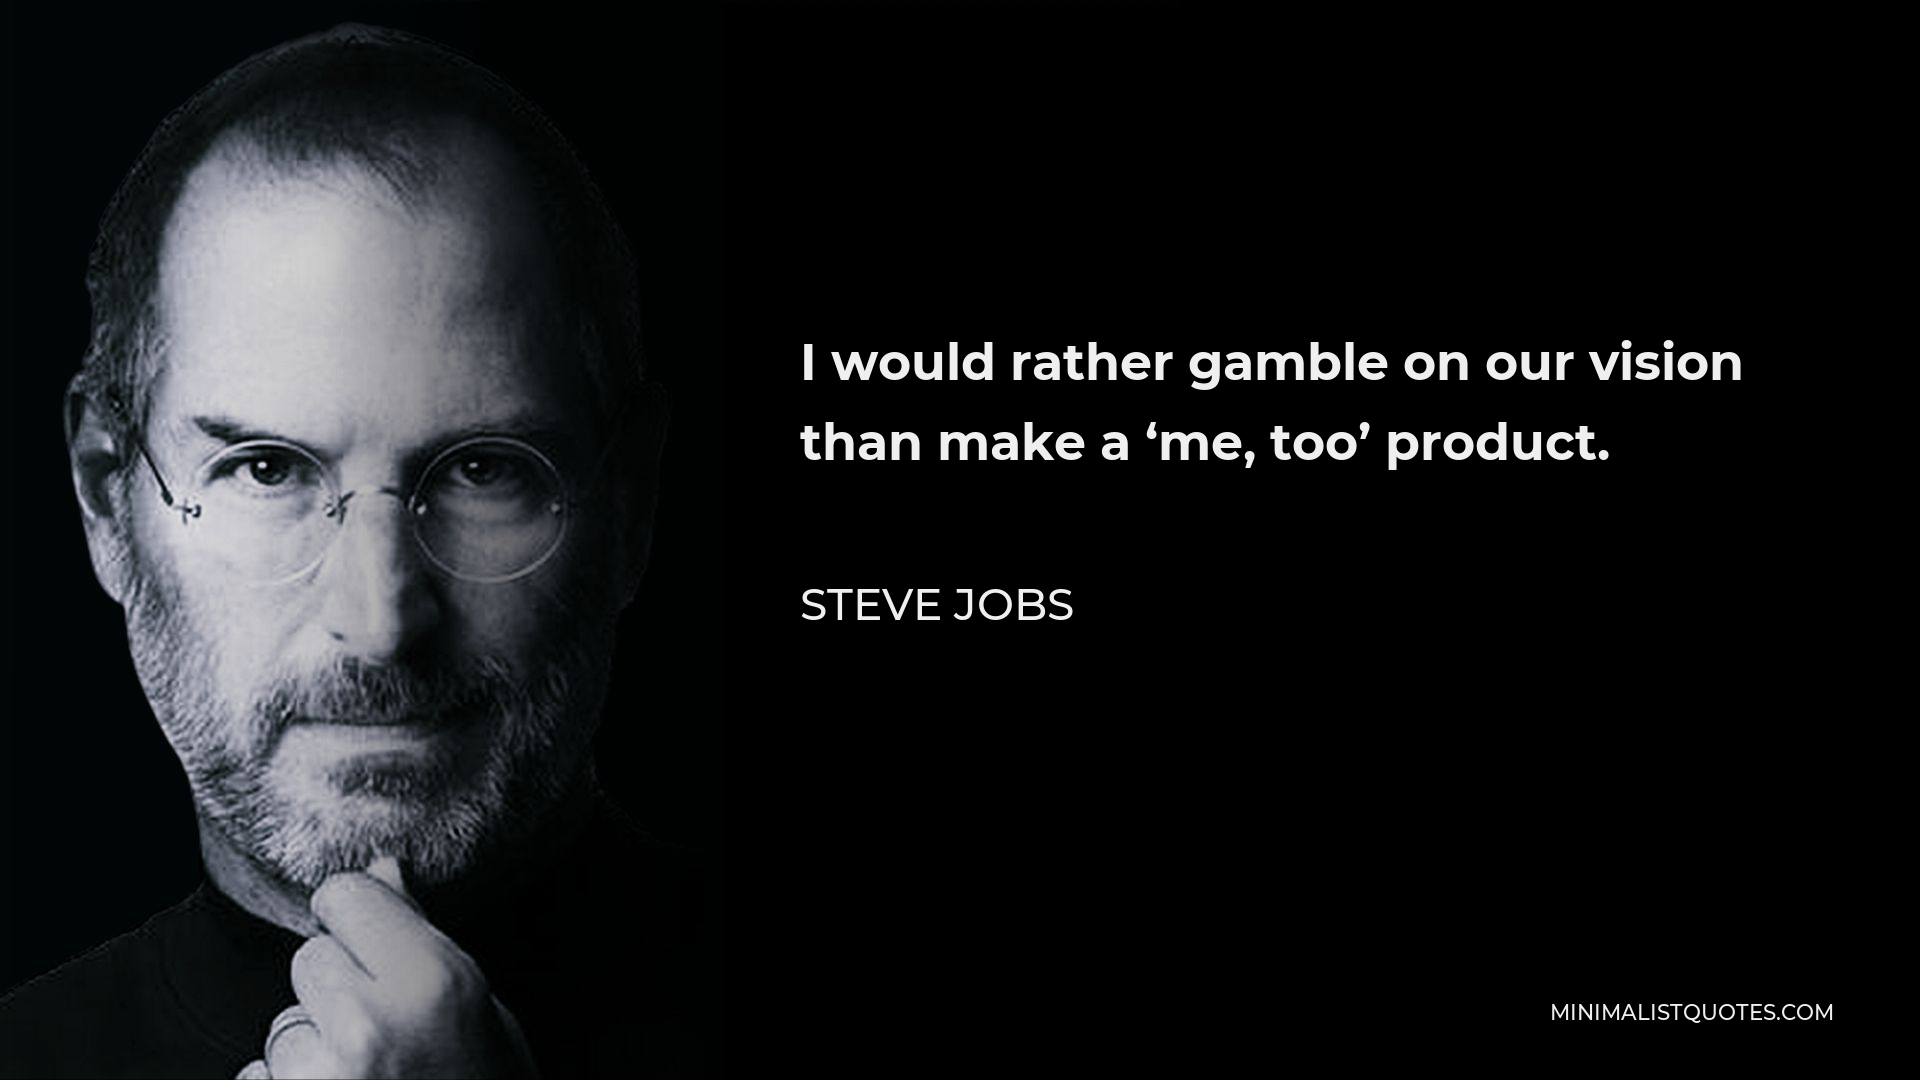 Steve Jobs Quote - I would rather gamble on our vision than make a ‘me, too’ product.